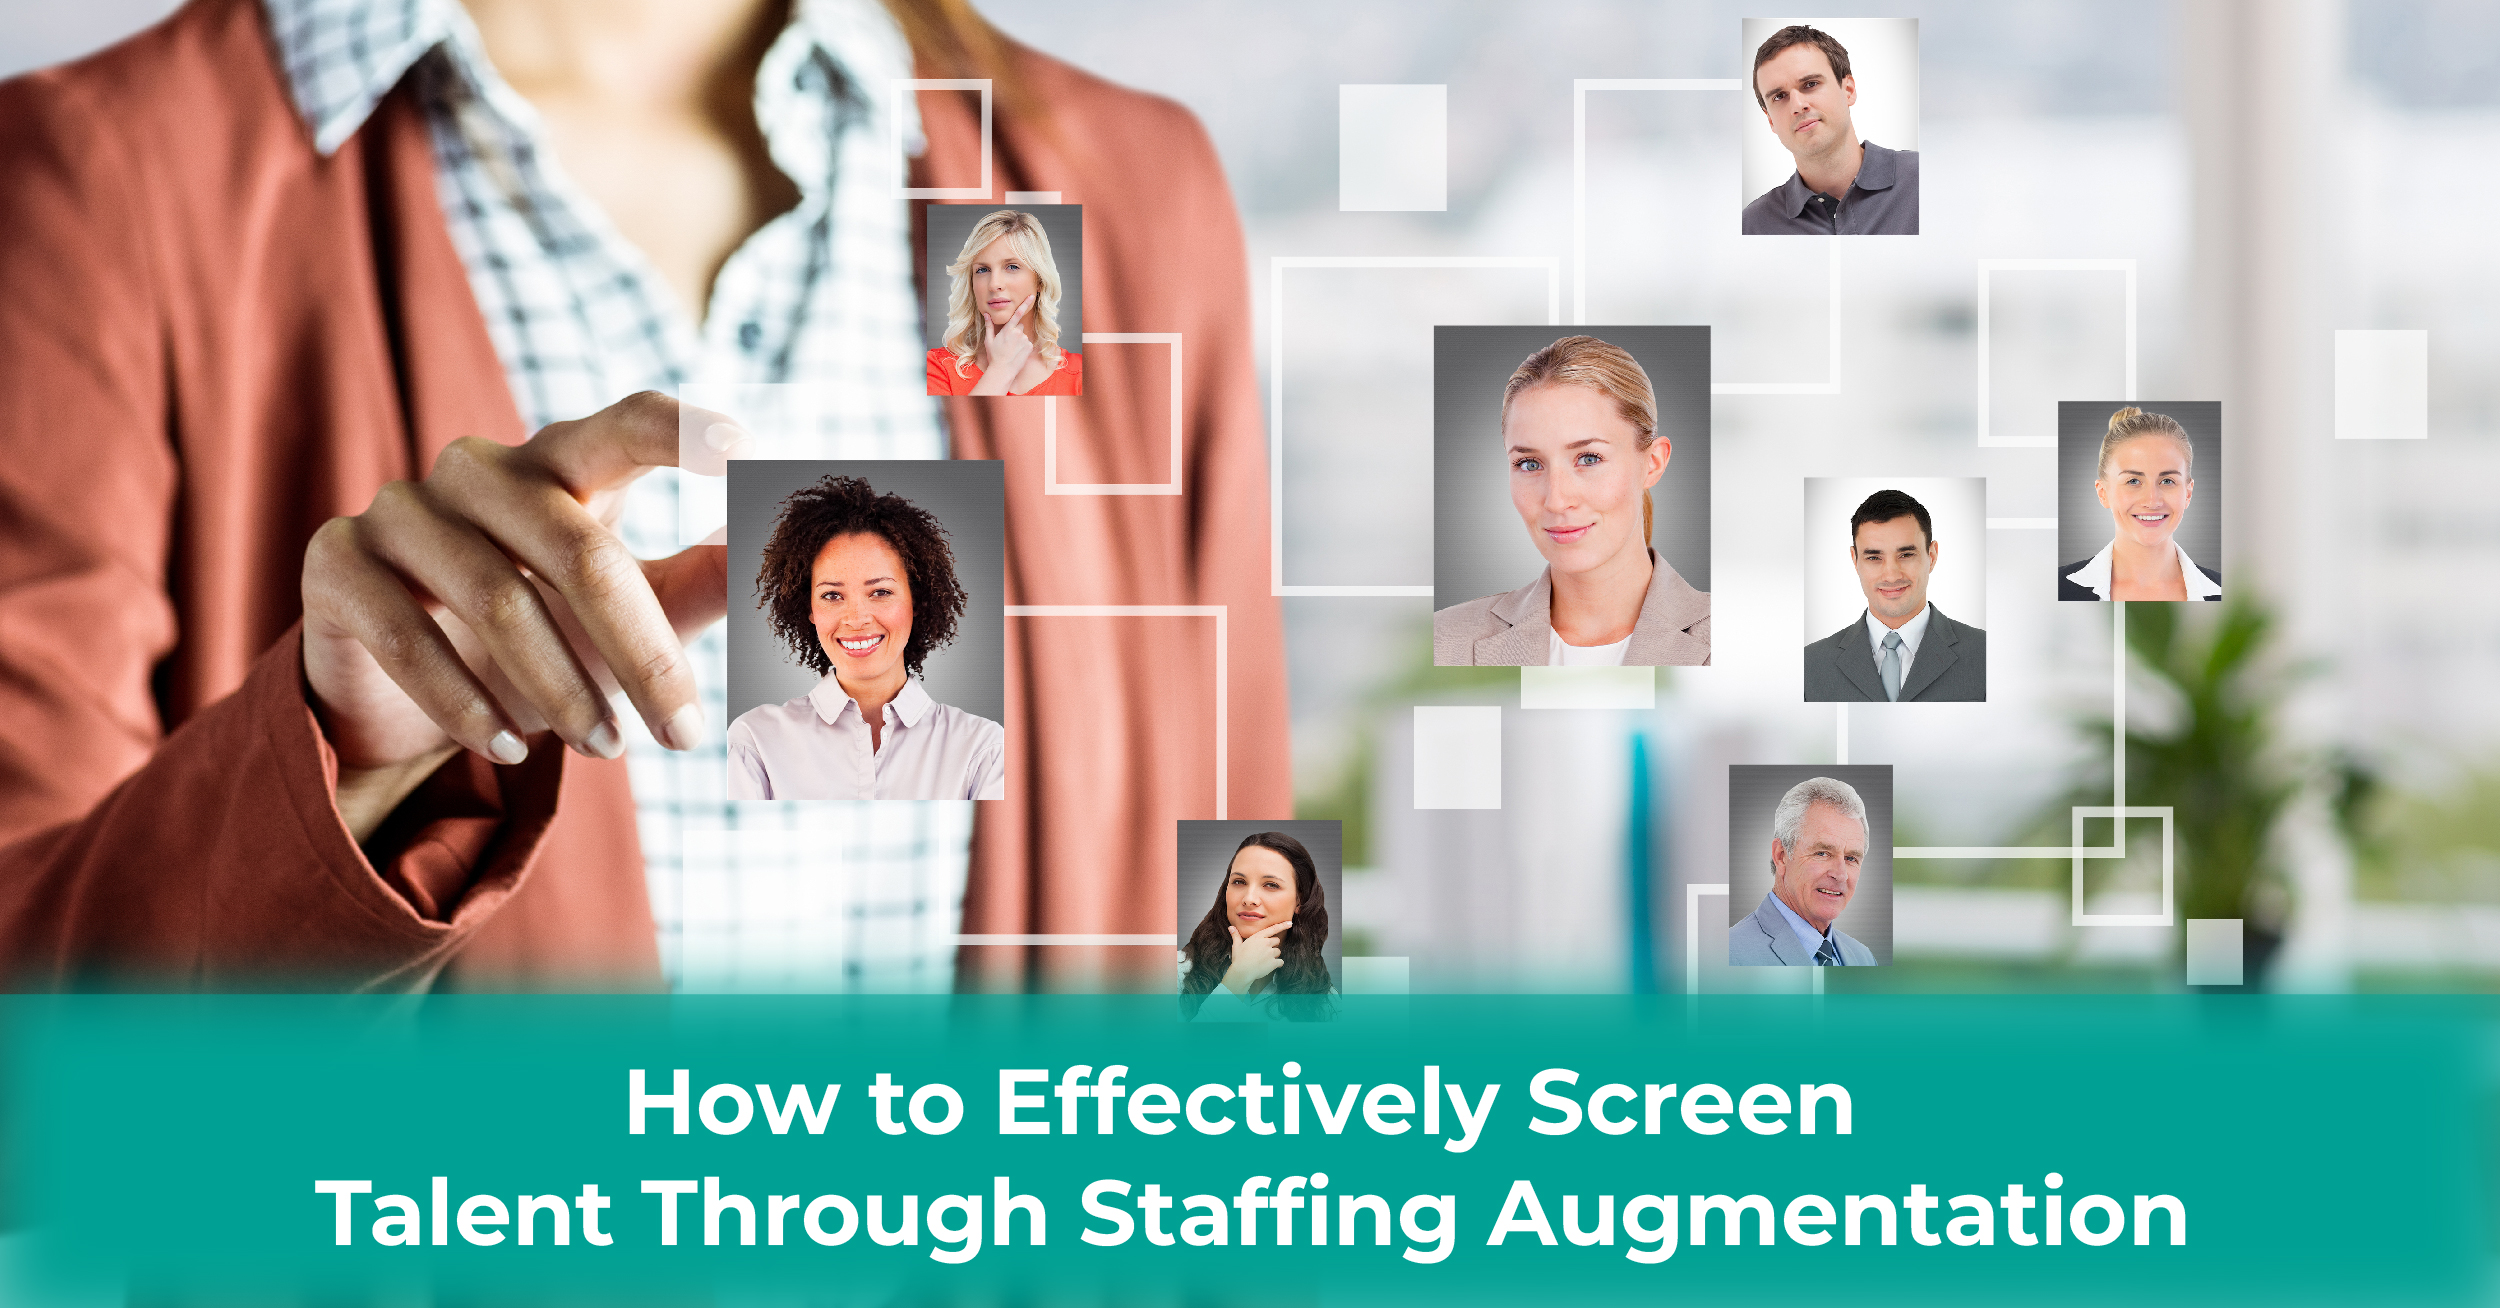 How to Effectively Screen Talent Through Staffing Augmentation